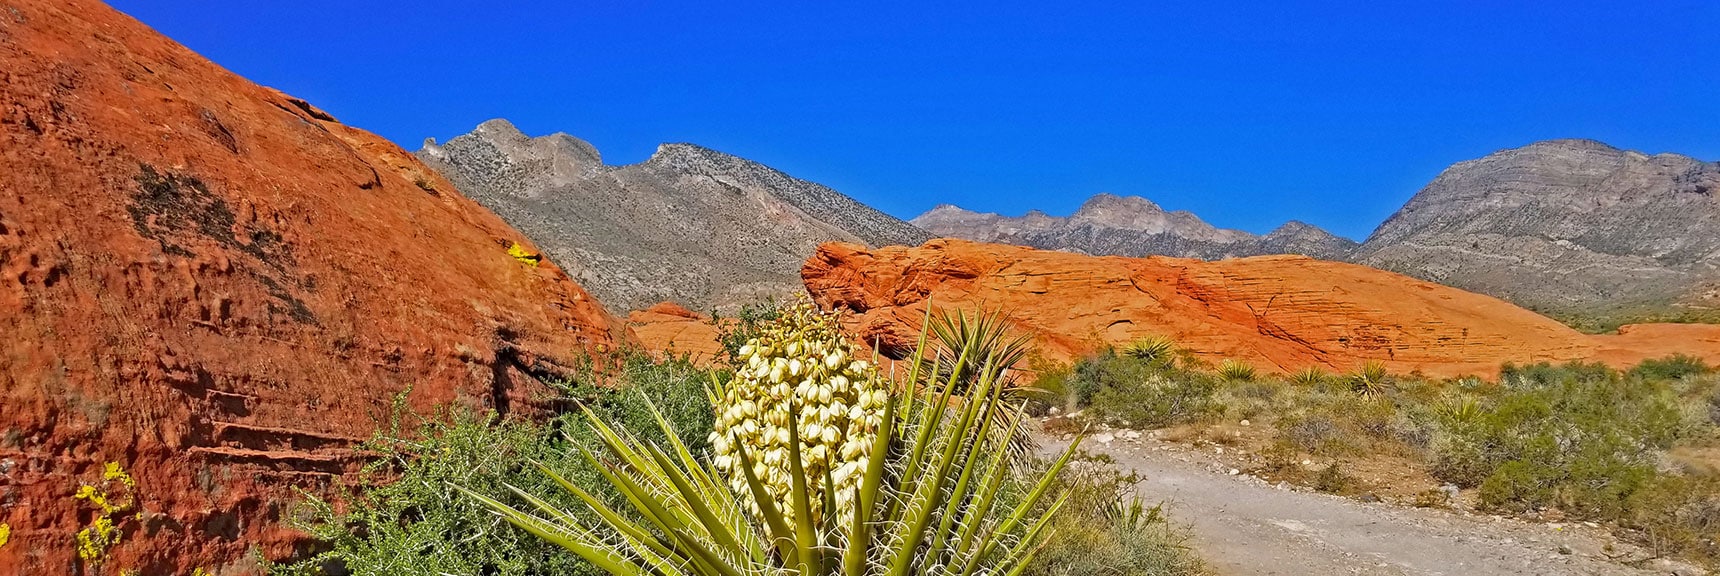 Yucca Blooms Everywhere on This Early April Saturday | Little Red Rock Las Vegas, Nevada, Near La Madre Mountains Wilderness